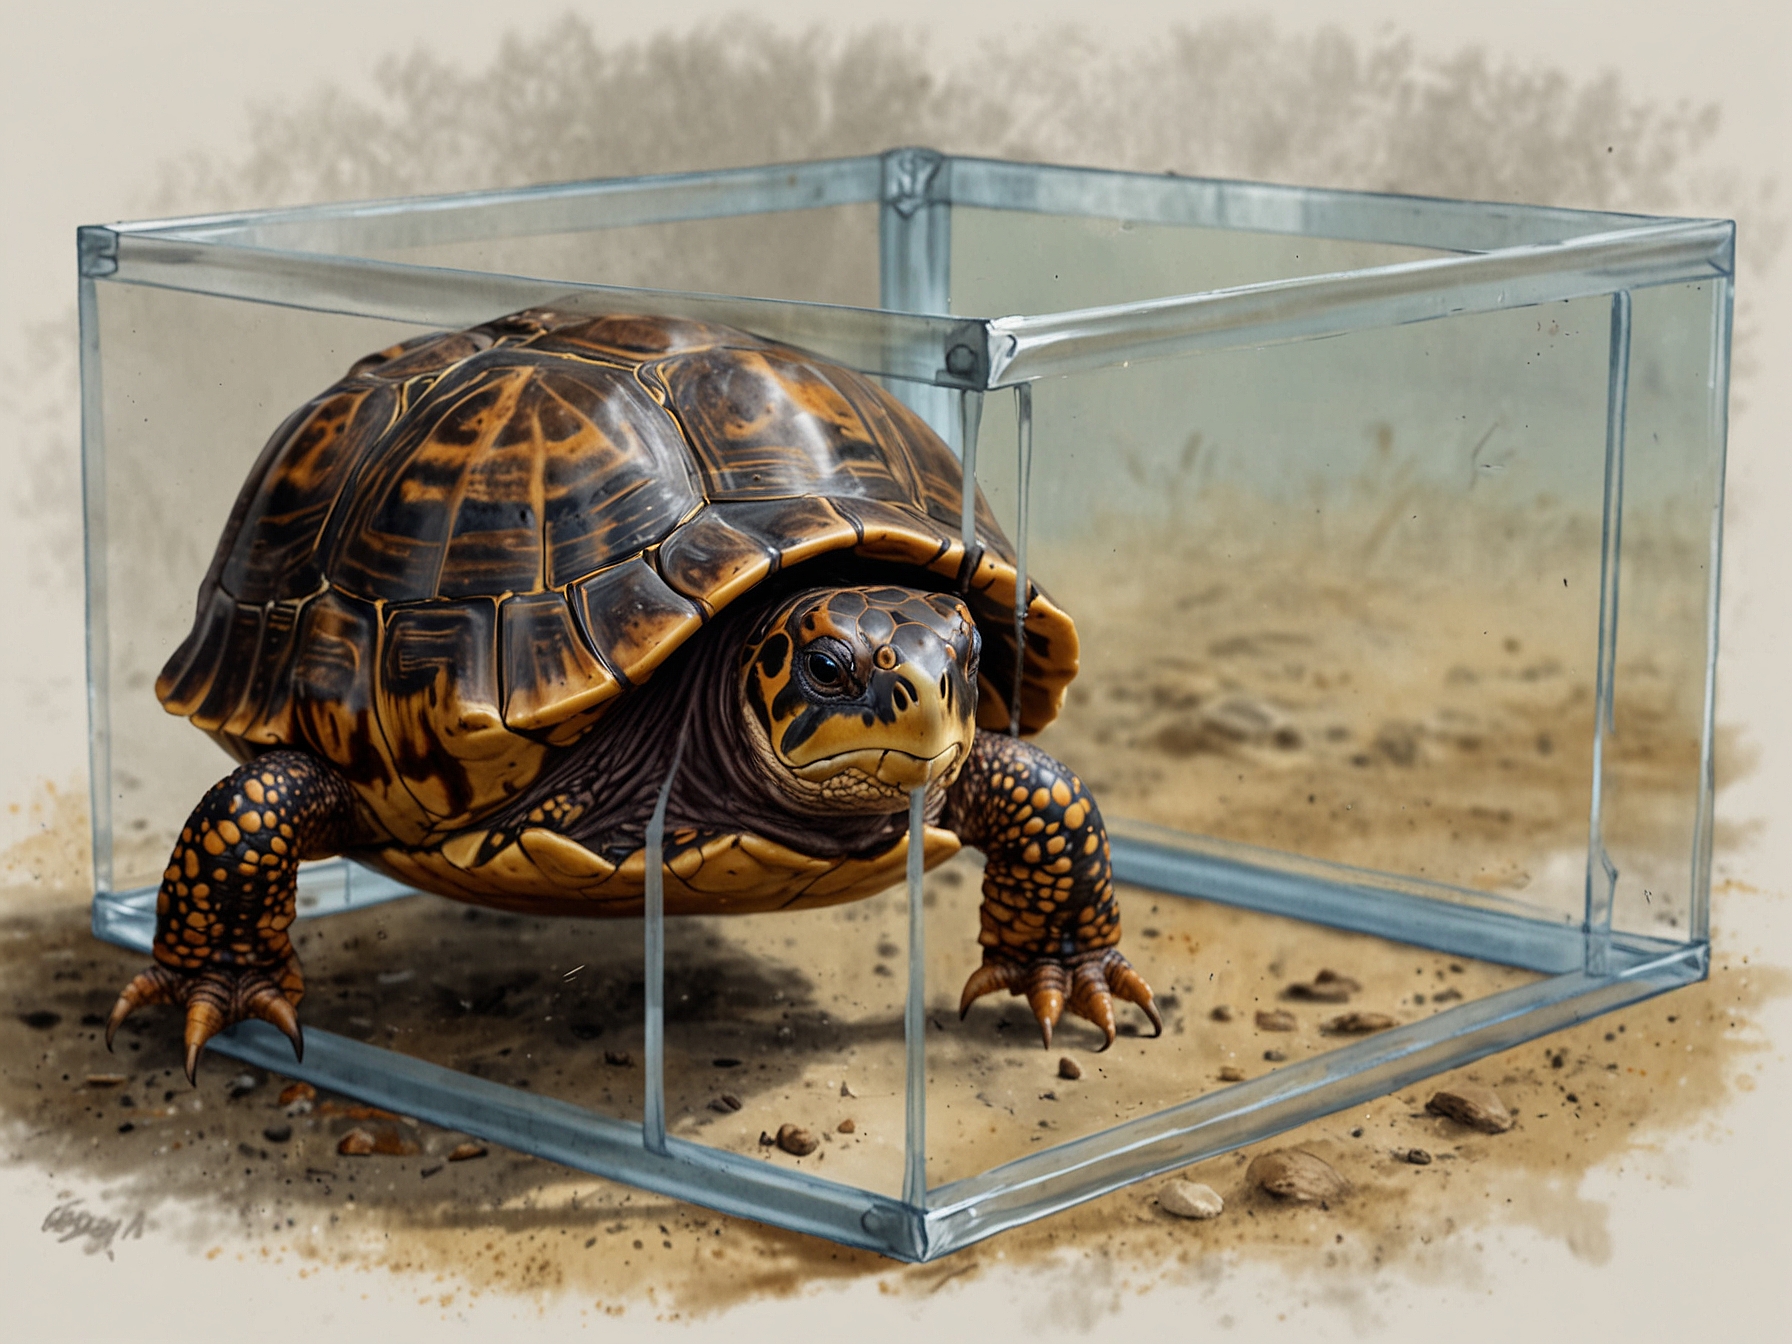 The 29 eastern box turtles rescued from the smuggling attempt, temporarily housed by wildlife authorities. The image illustrates the importance of rescue and rehabilitation efforts for protected species.